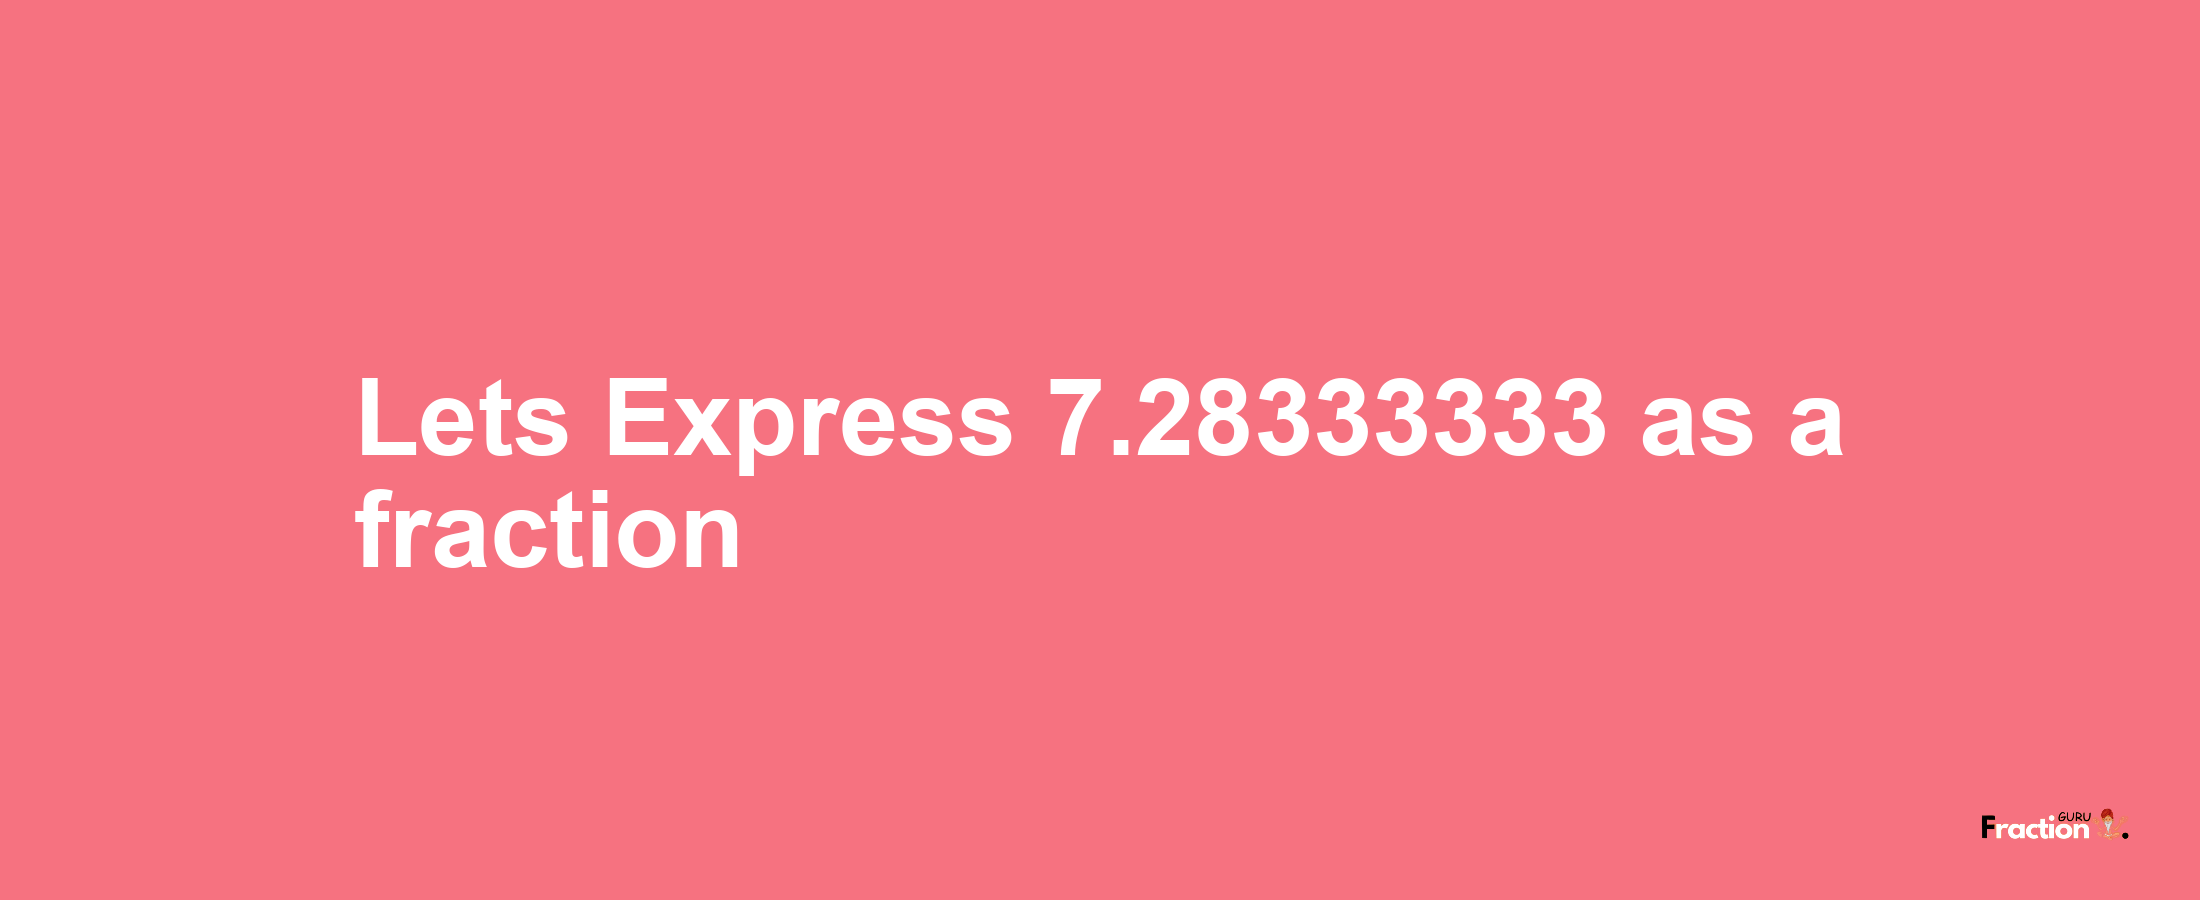 Lets Express 7.28333333 as afraction